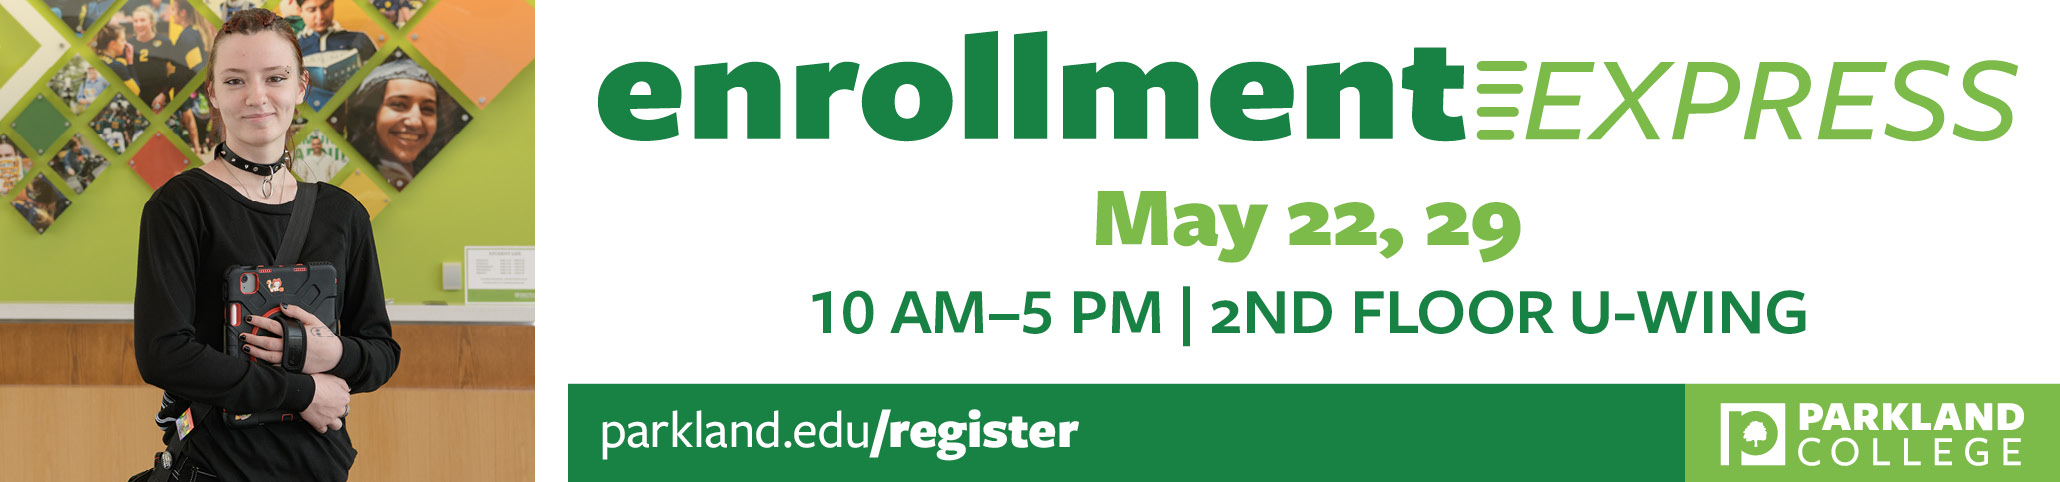 Enrollment Express May 22 and 29